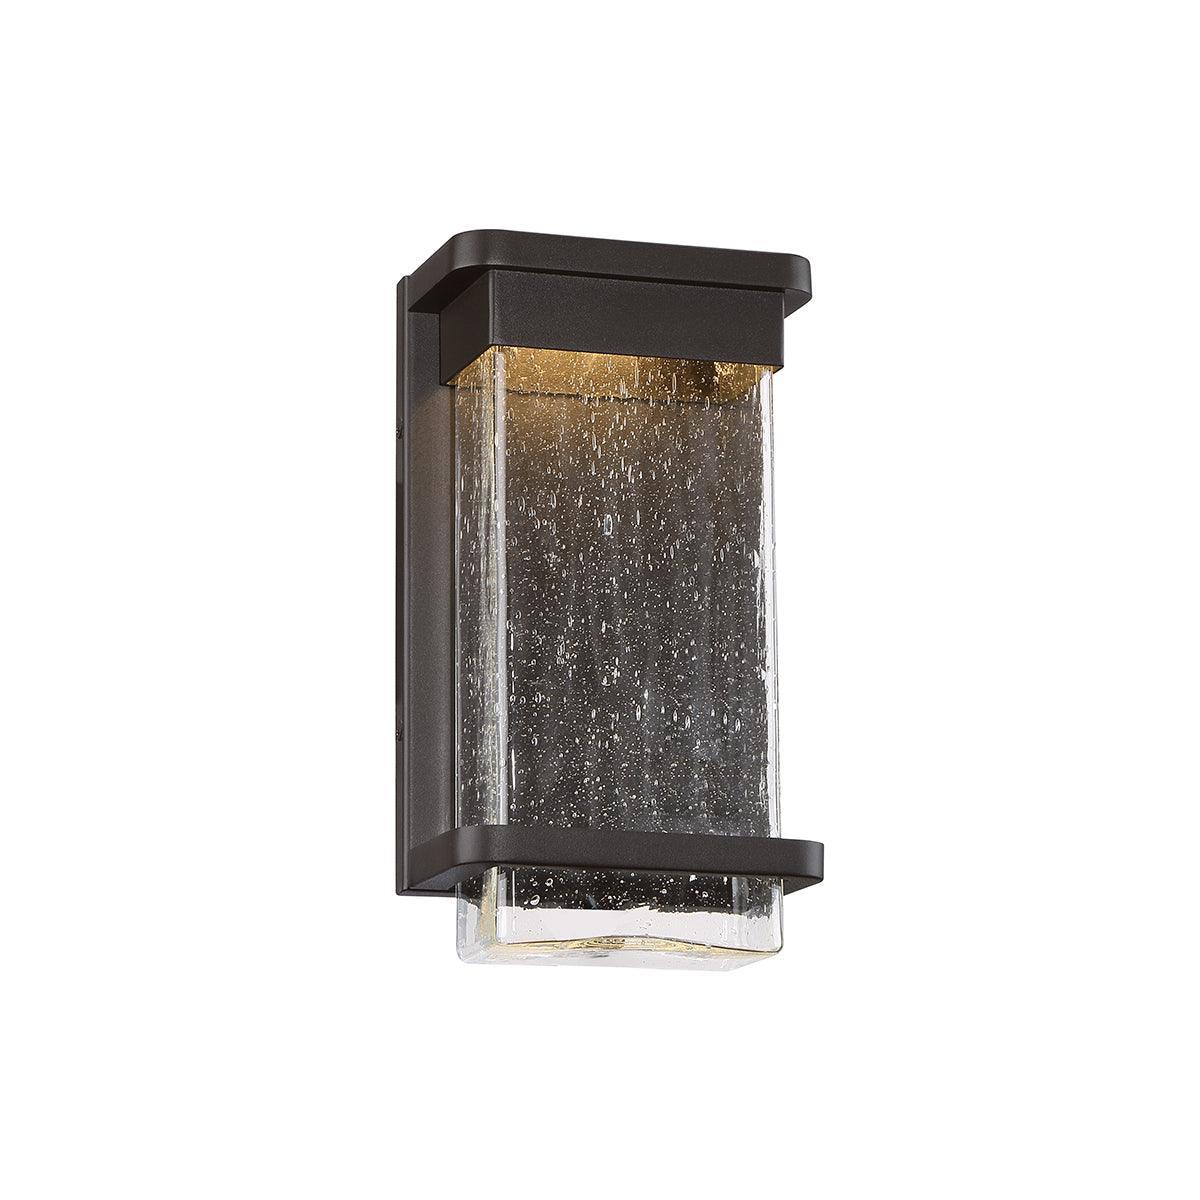 Modern Forms - Vitrine LED Outdoor Wall Mount - WS-W32512-BZ | Montreal Lighting & Hardware